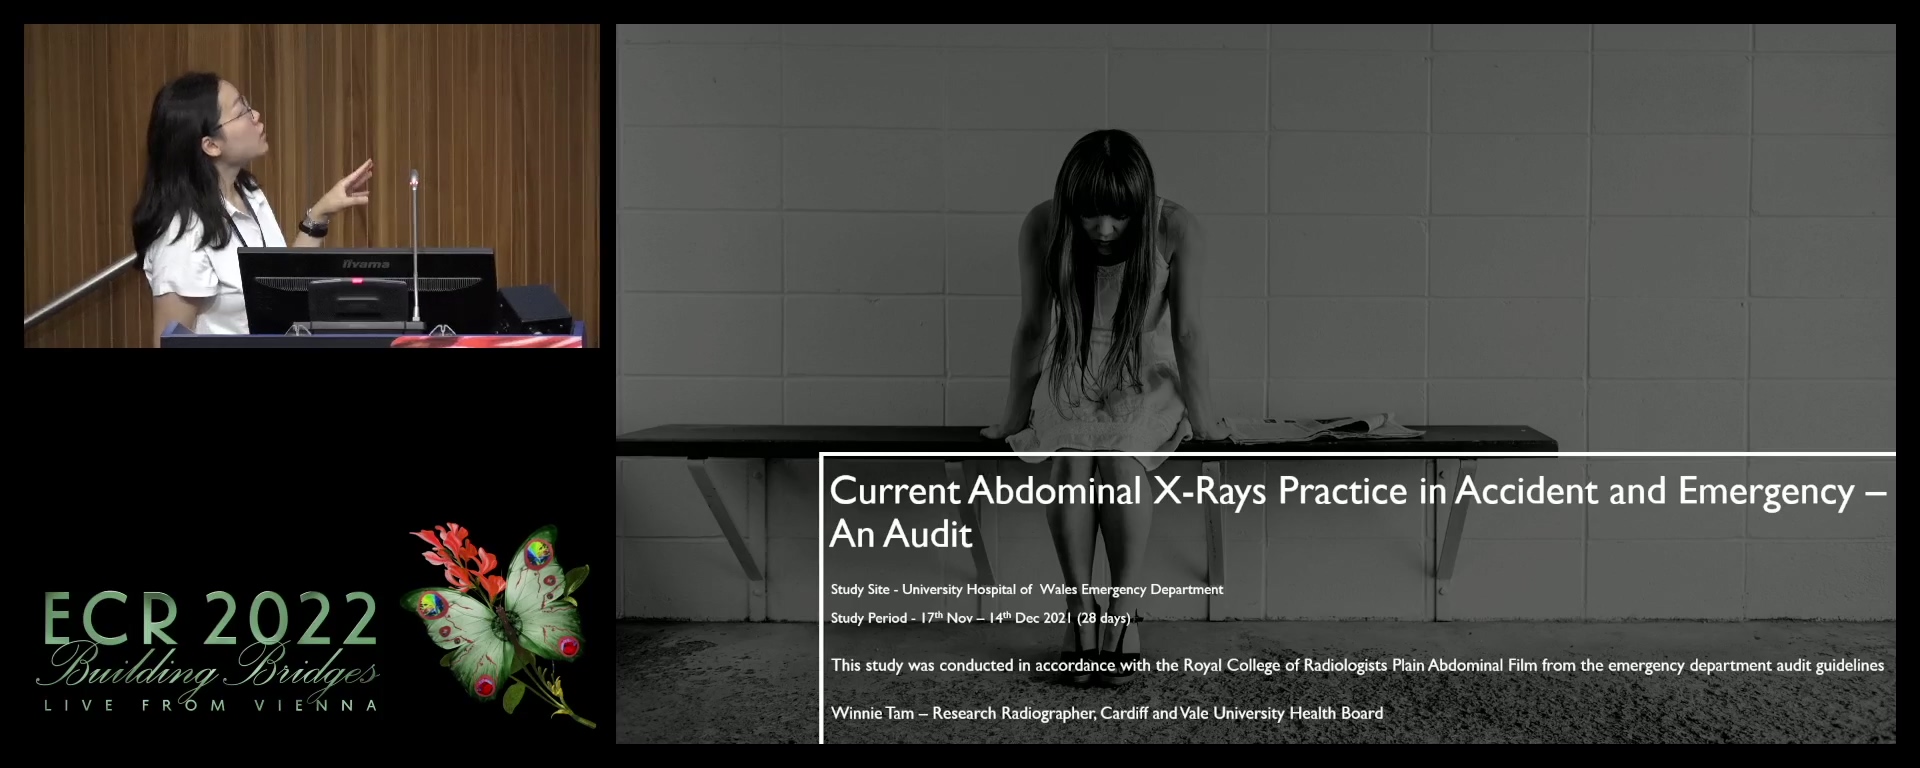 Current abdominal x-rays practice in accident and emergency: an audit - Winnie Tam, Cardiff / UK